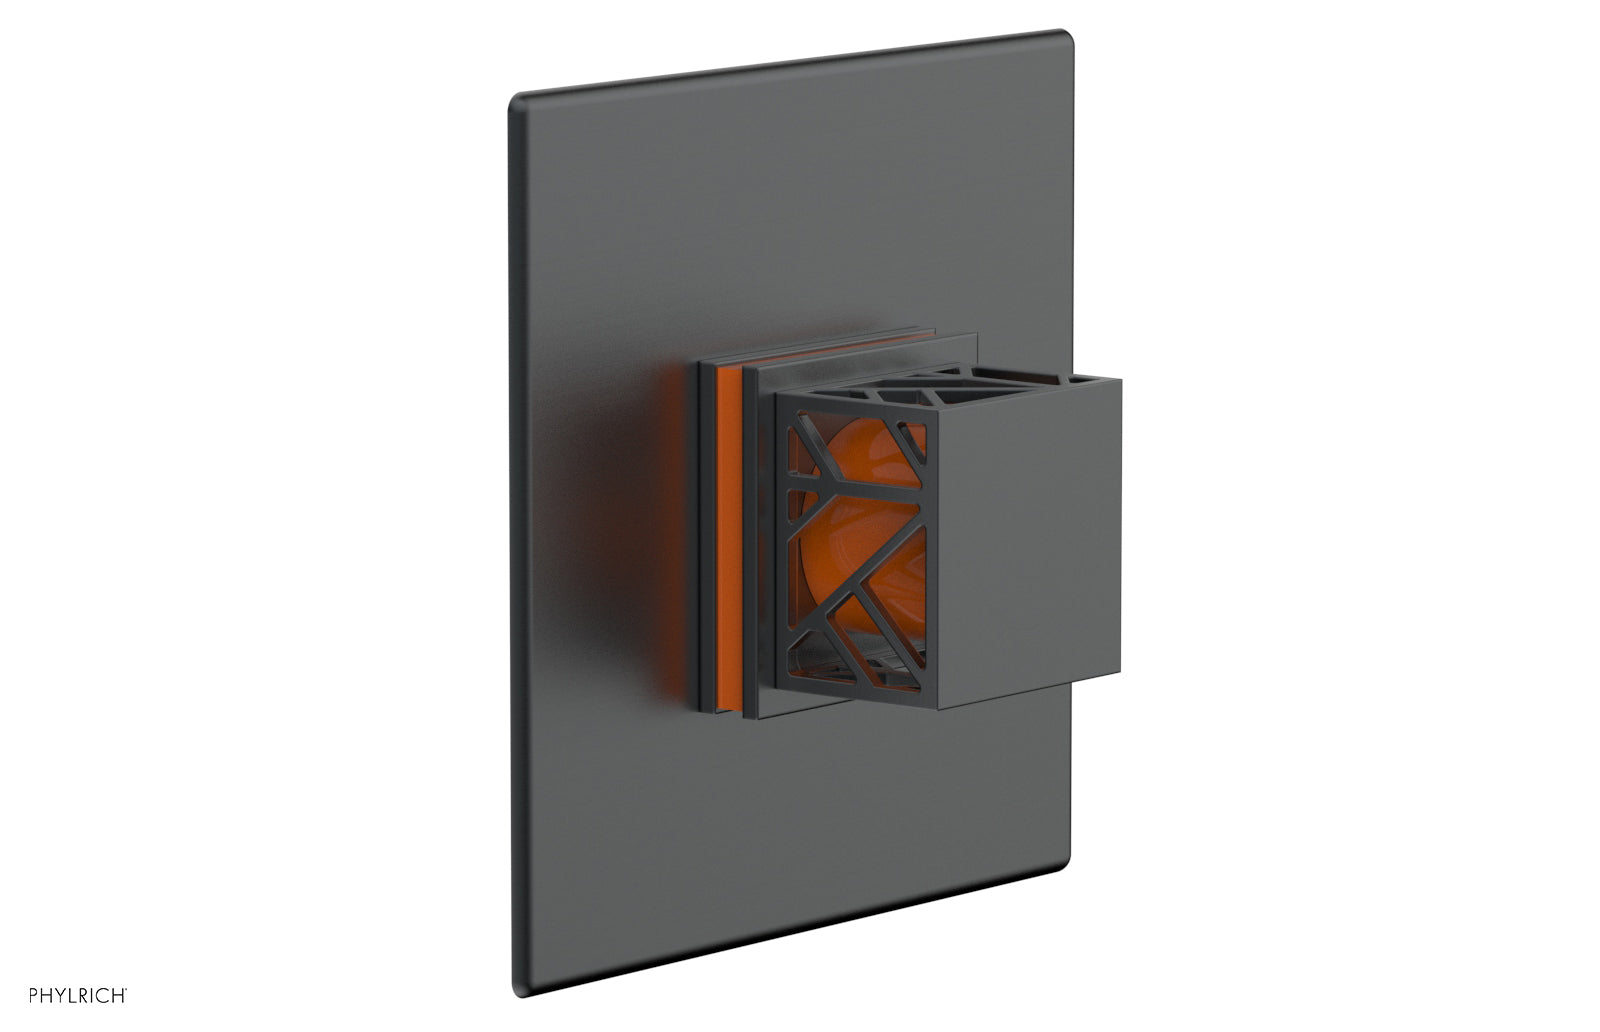 Phylrich JOLIE Pressure Balance Shower Plate & Handle Trim, Square Handle with "Orange" Accents